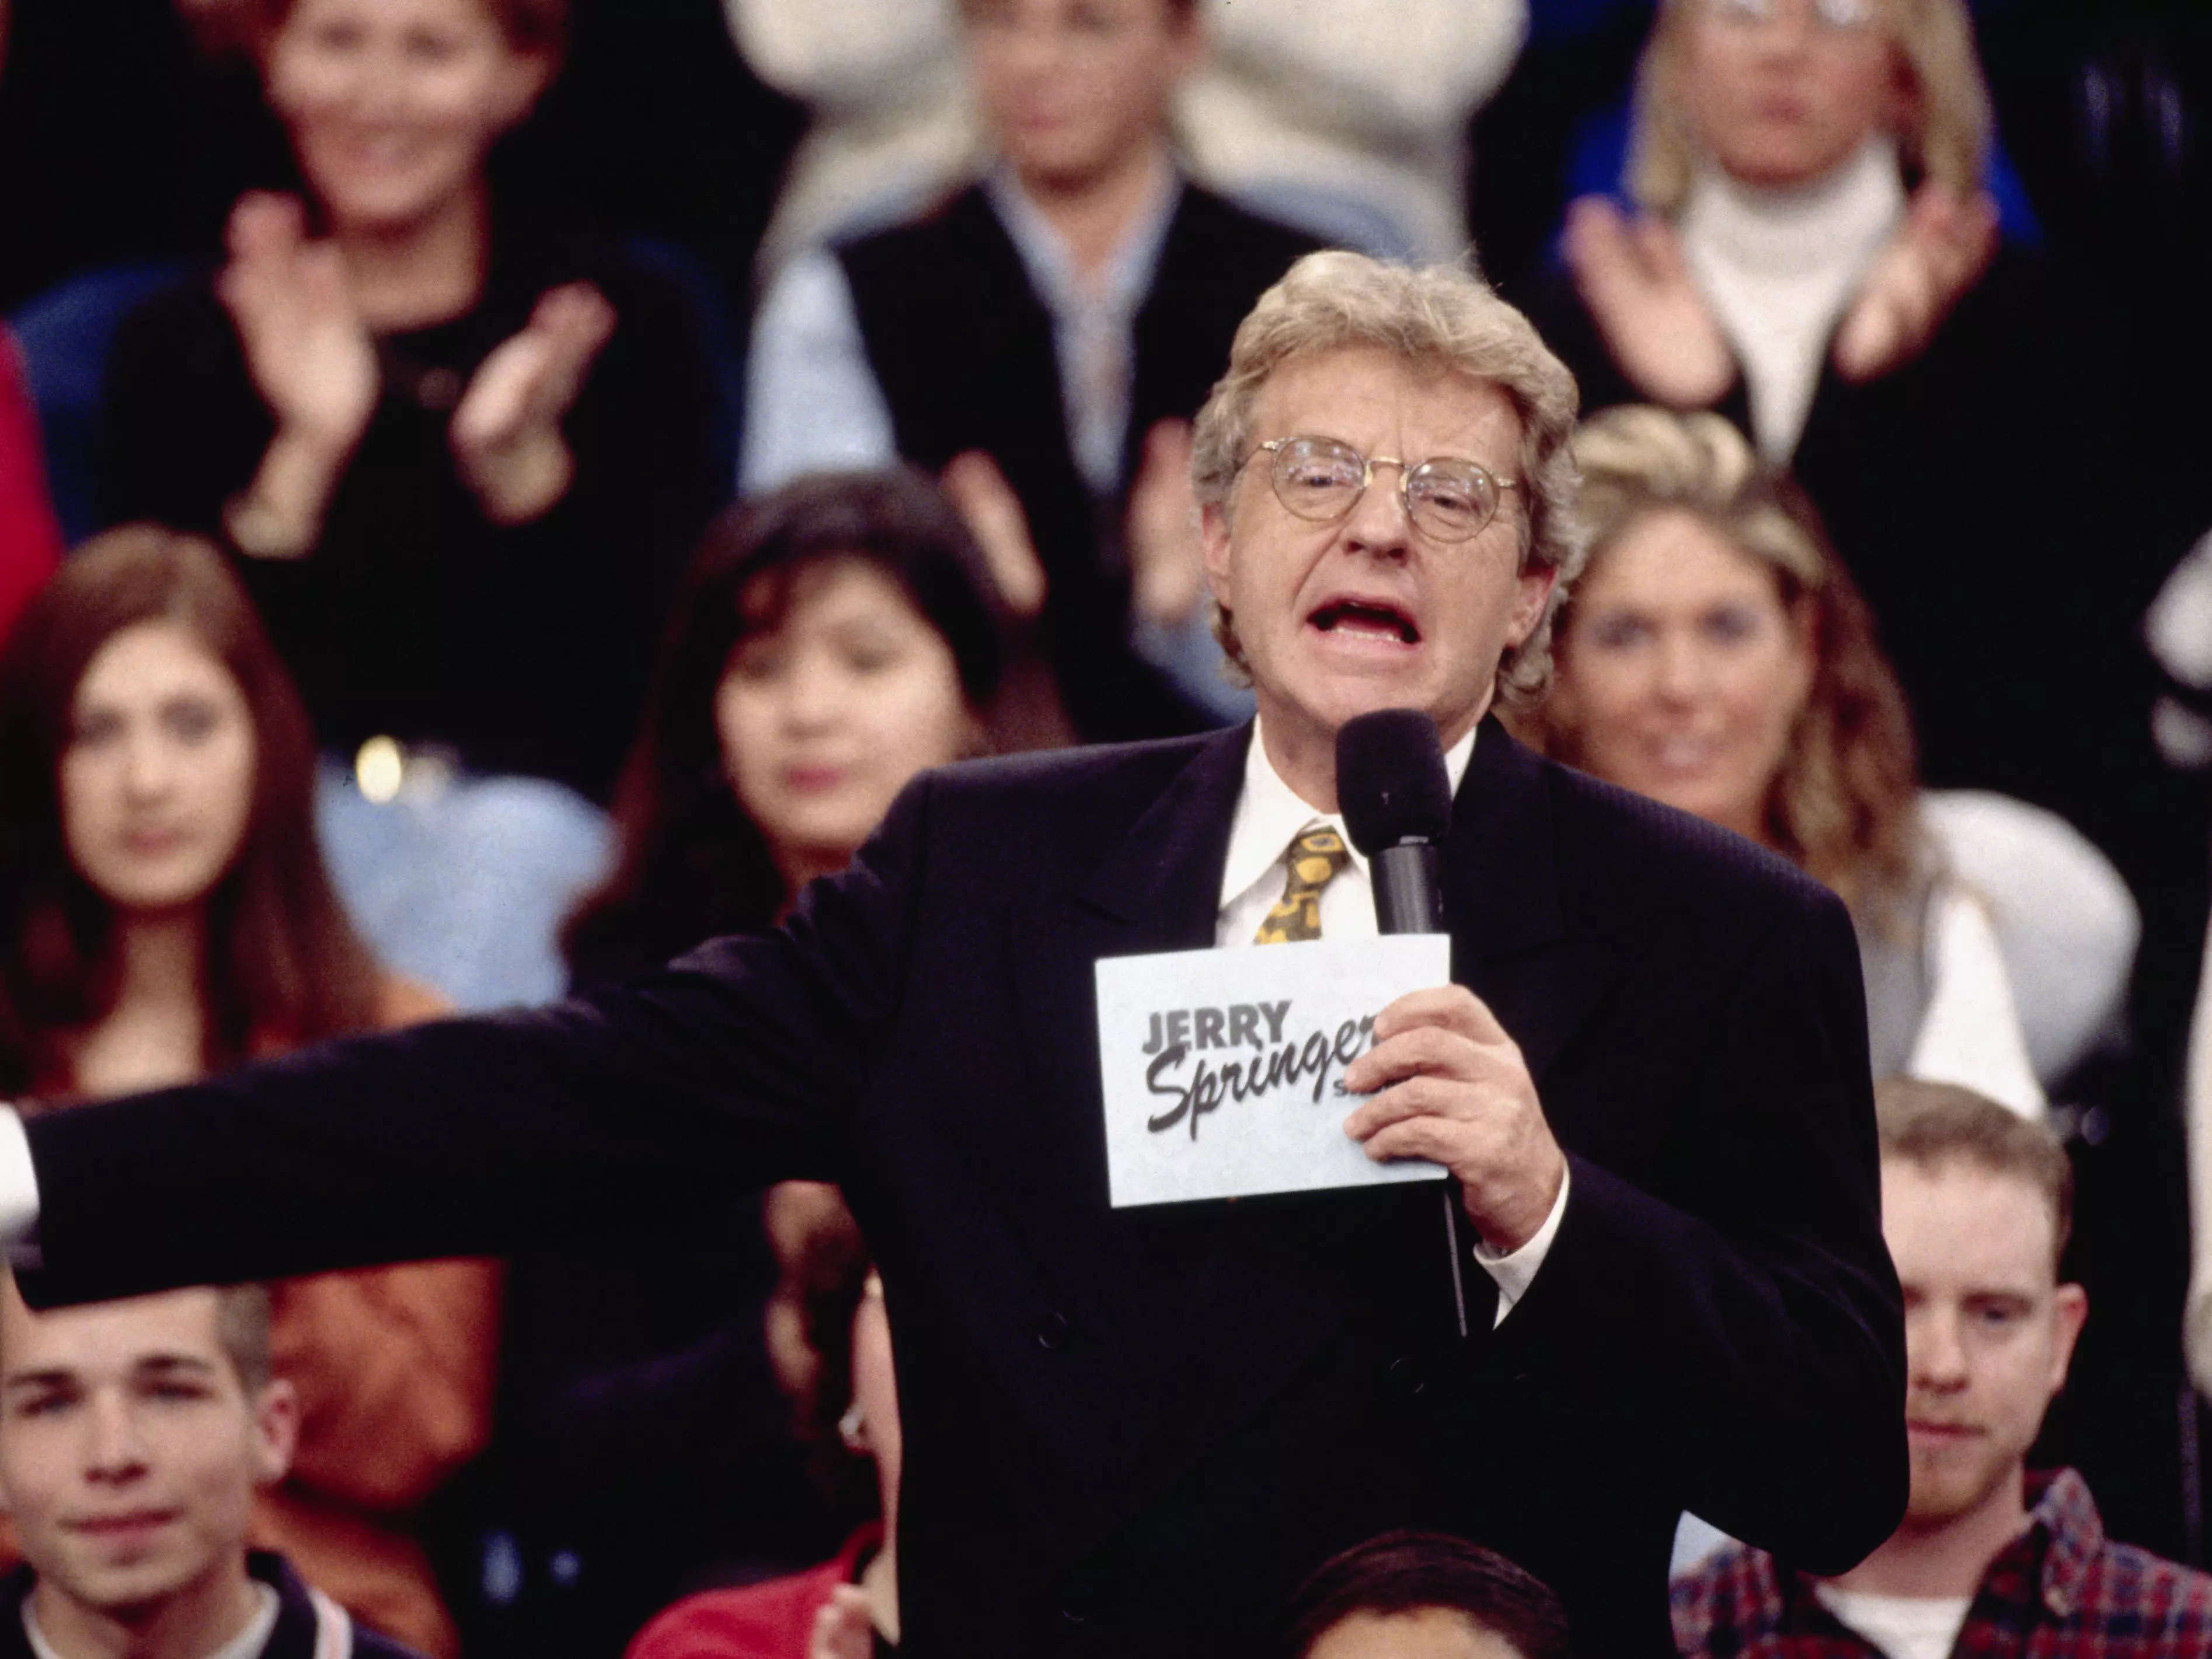 Jerry Springer speaking into a microphone and gesturing to the audience behind him on the set of "The Jerry Springer Show."